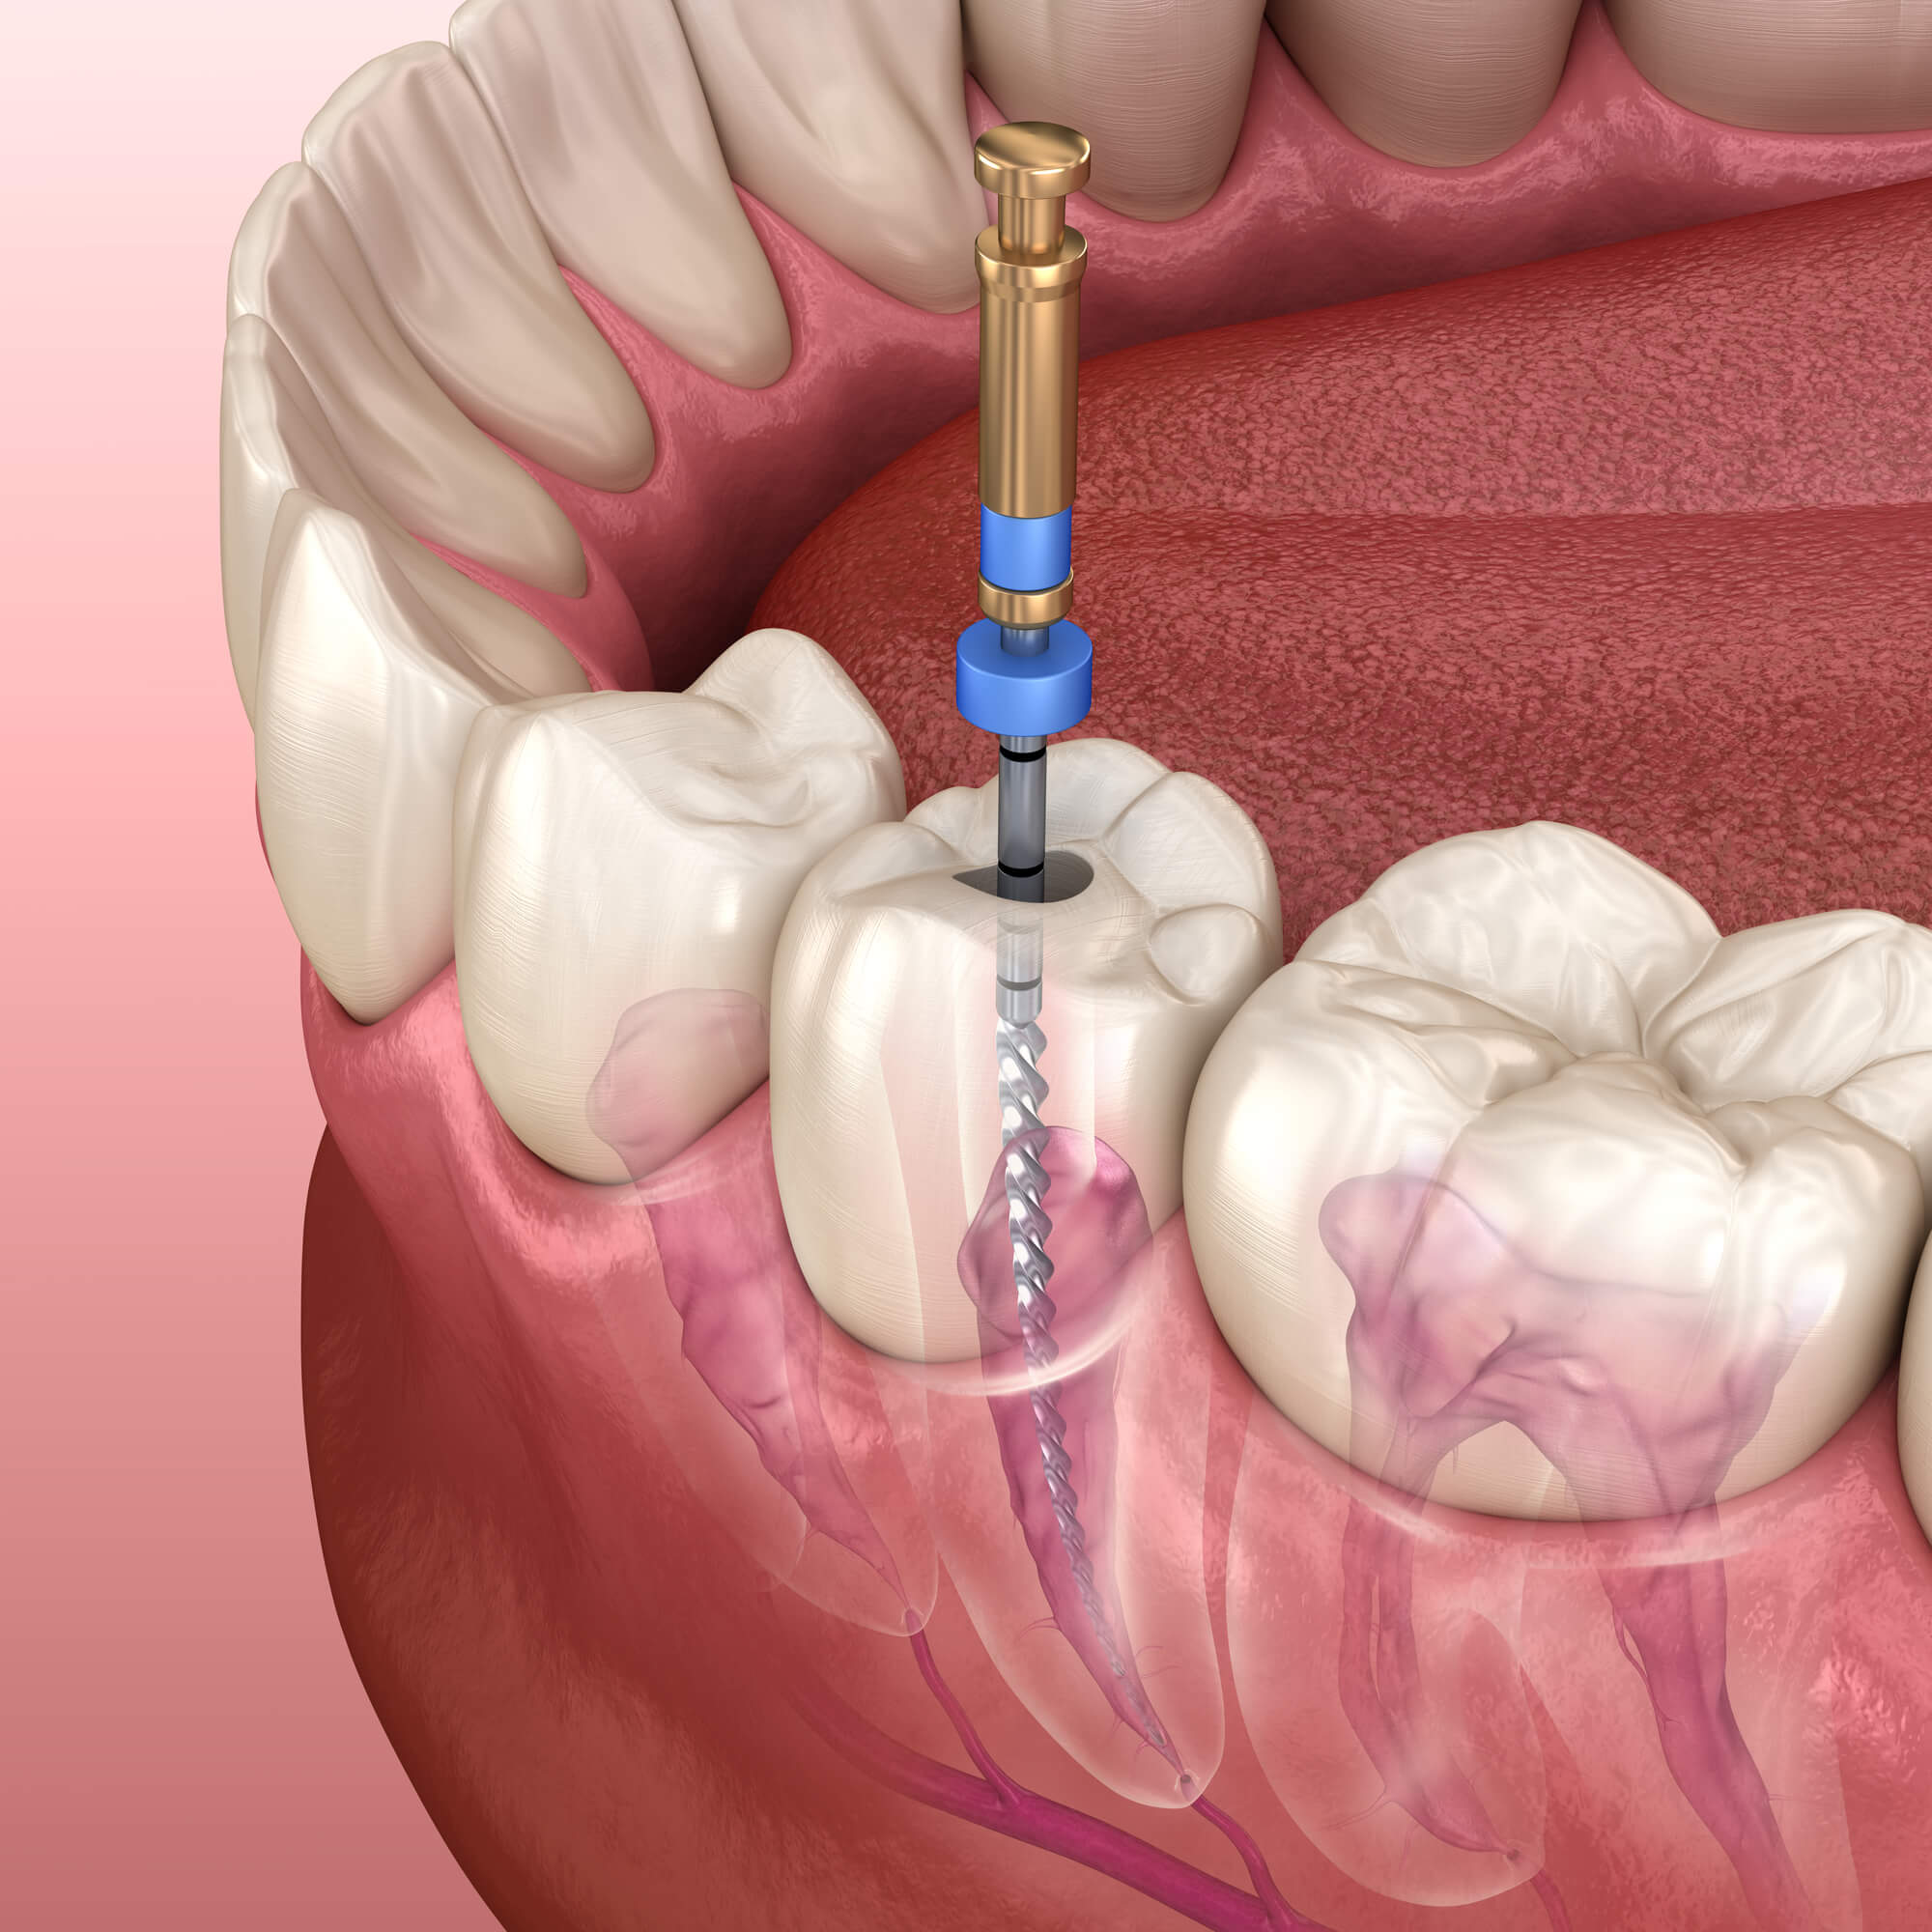 Endodontic root canal treatment process. Medically accurate tooth 3D illustration in Lisle, IL